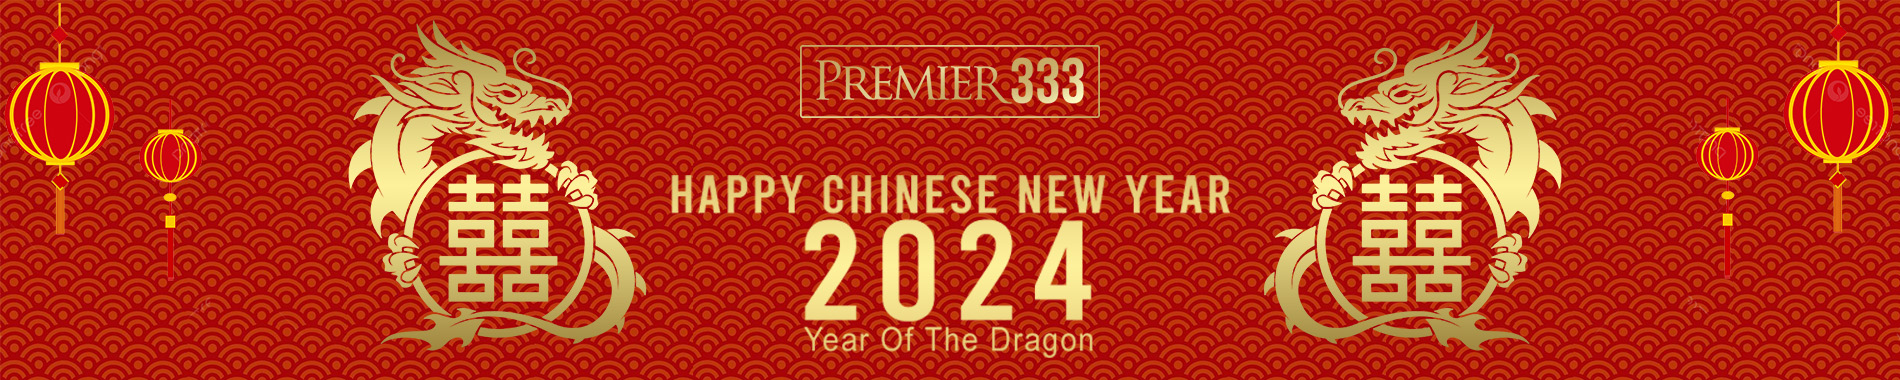 HAPPY CHINESE NEW YEAR 2024 PREMIER333